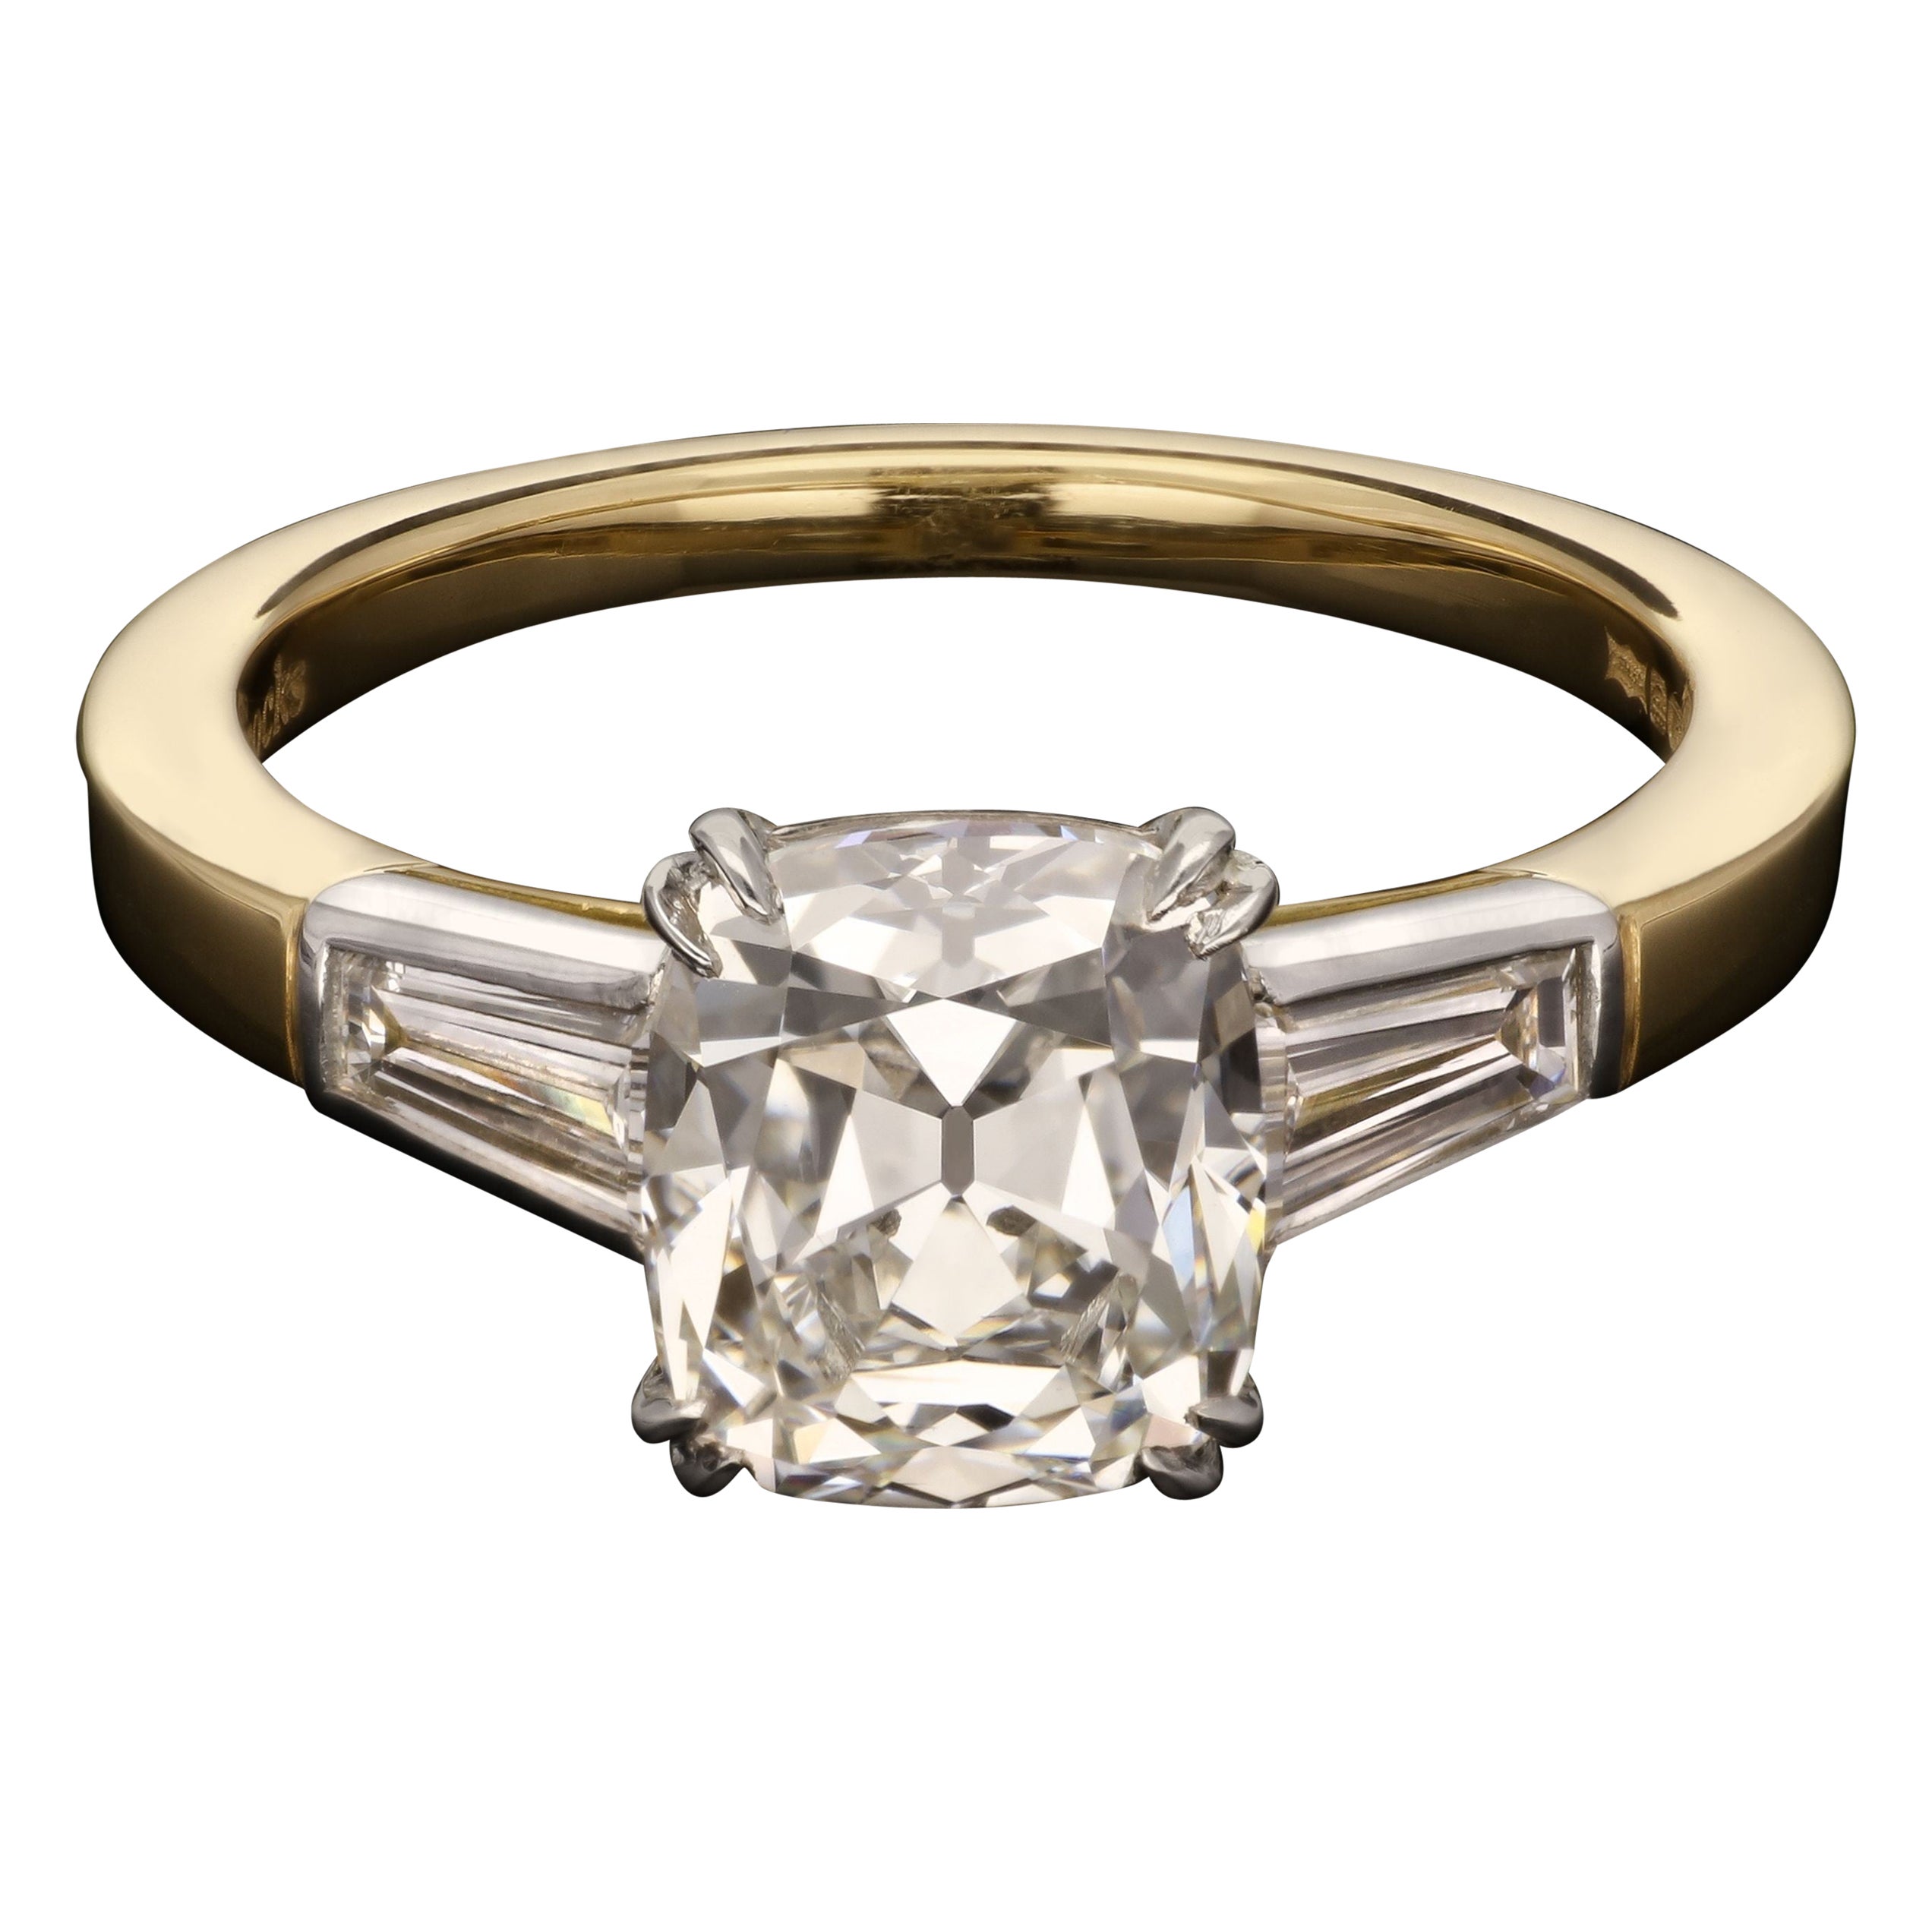 Hancocks 2.01ct Old Mine Cushion Cut Diamond Ring Tapered Baguette Shoulders For Sale